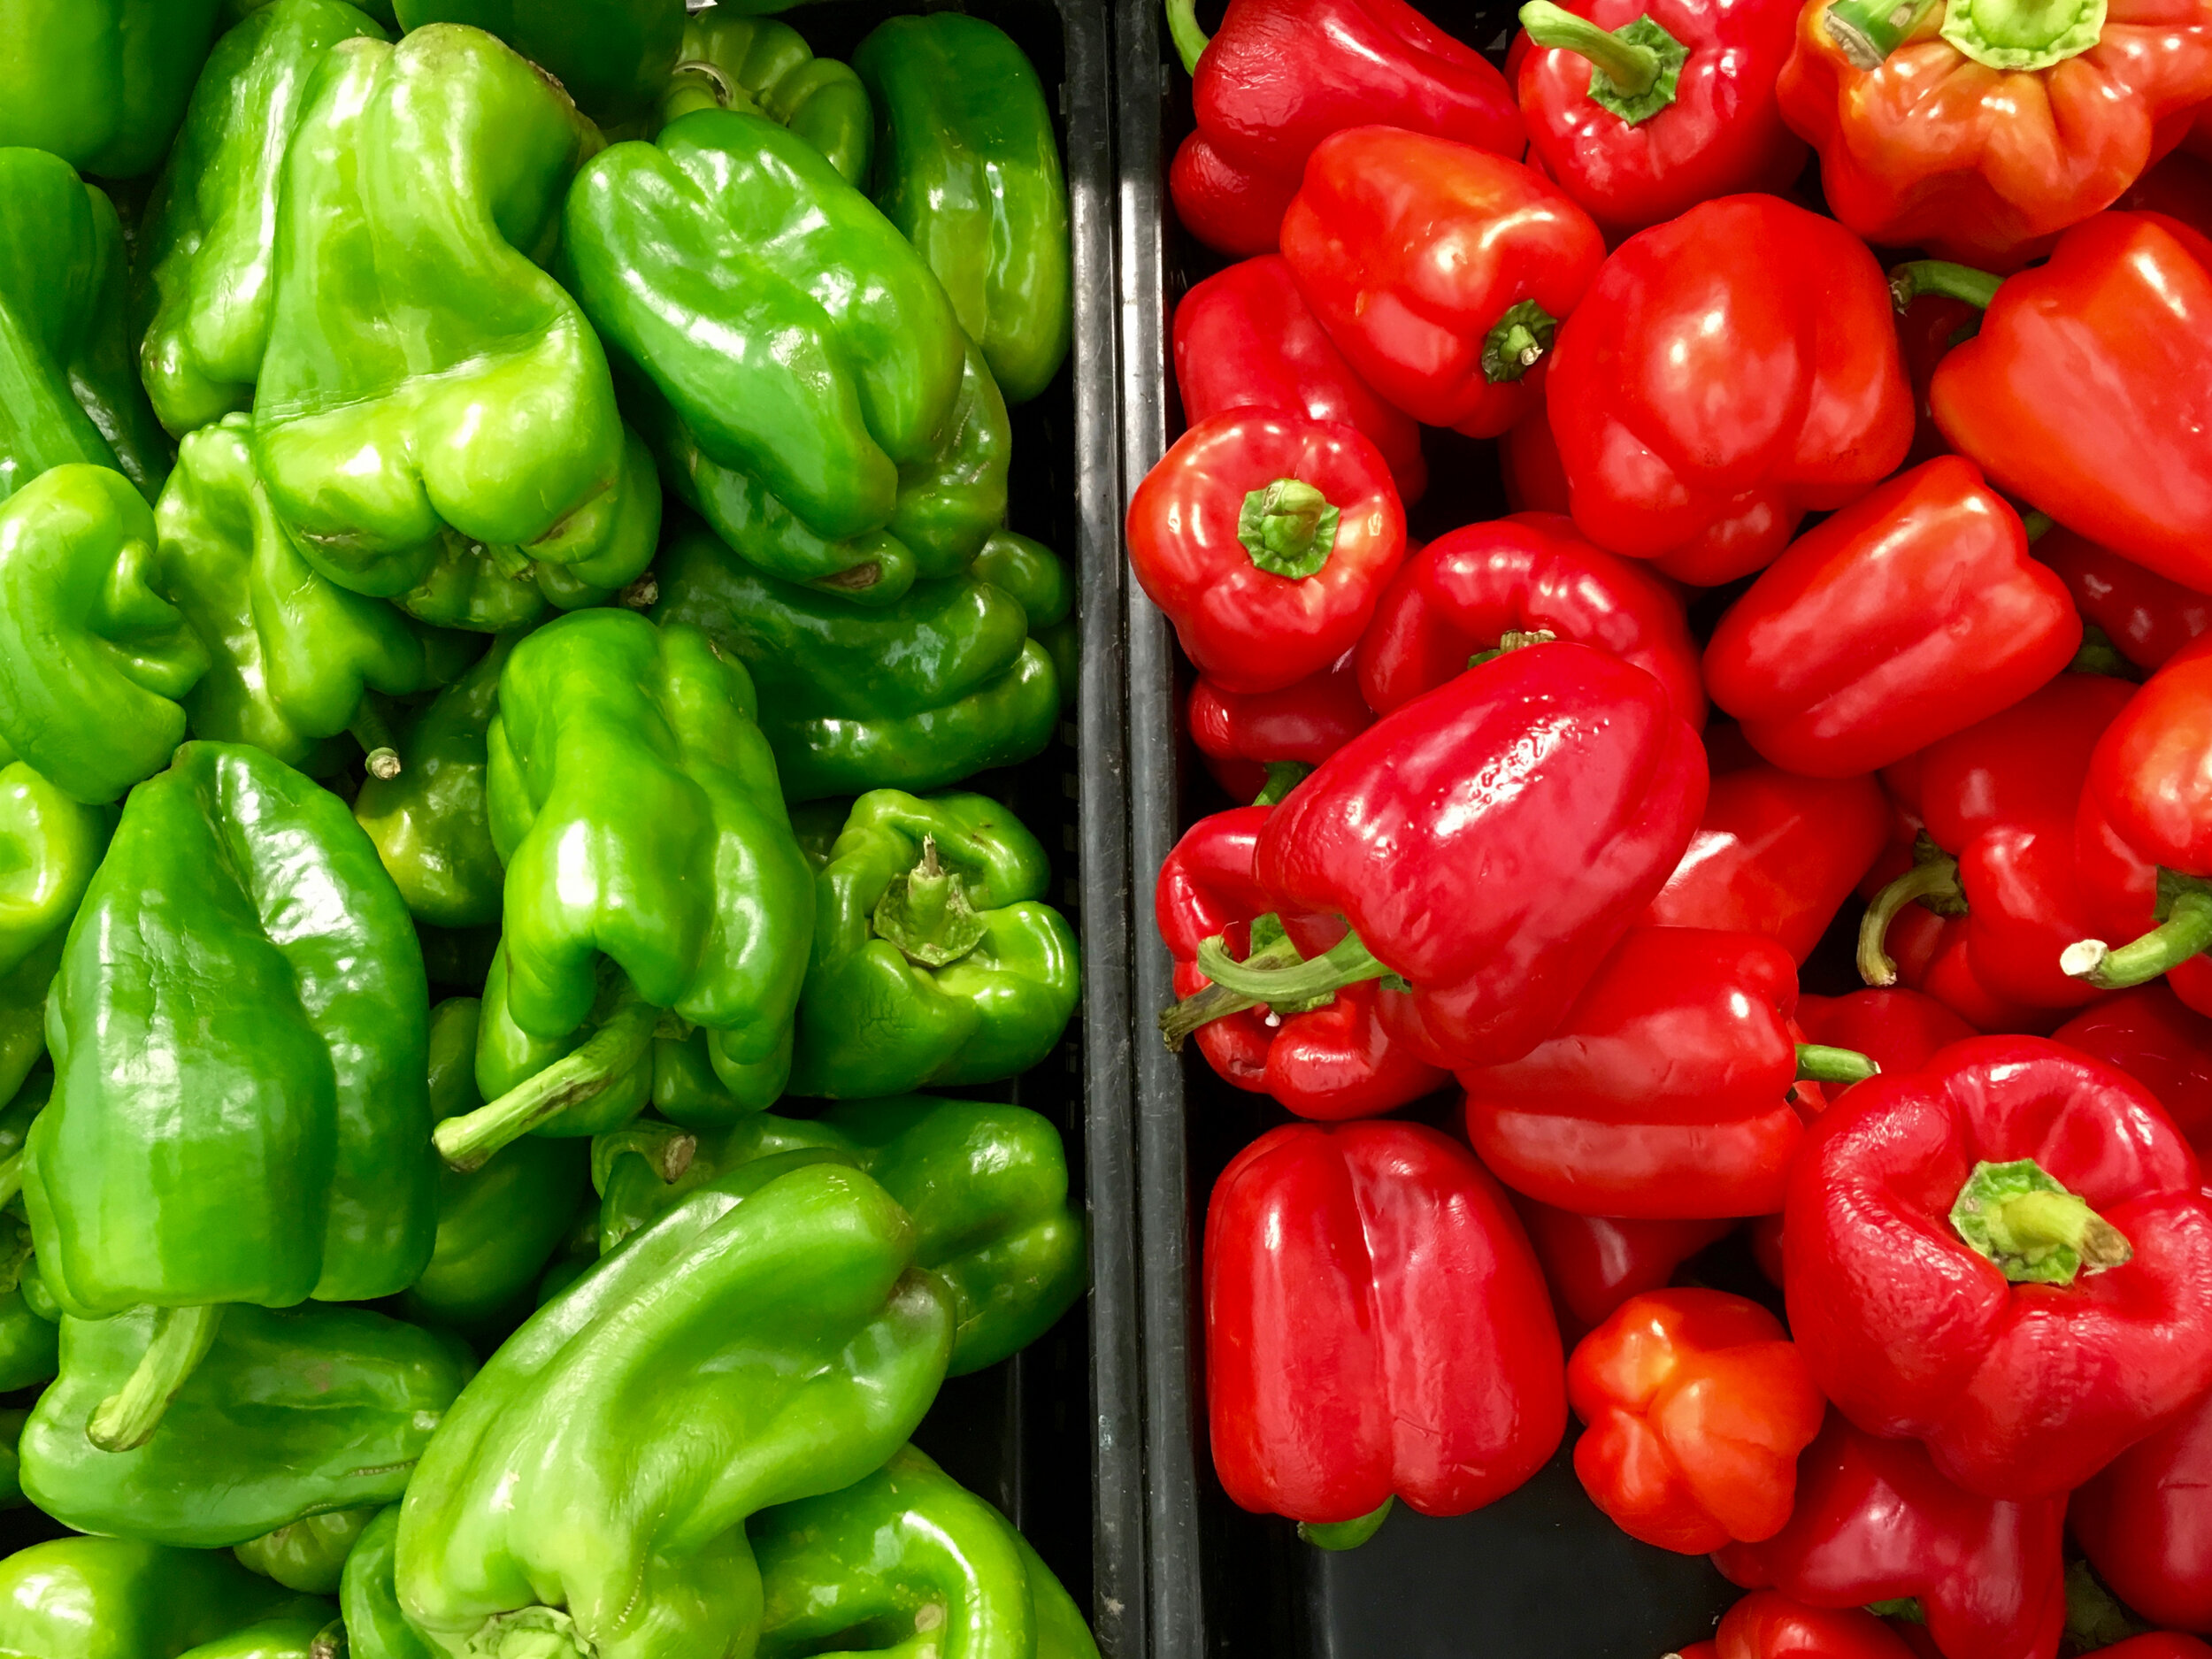 Why You'll Never Find A Green Bell Pepper In A Multi-Pepper Pack